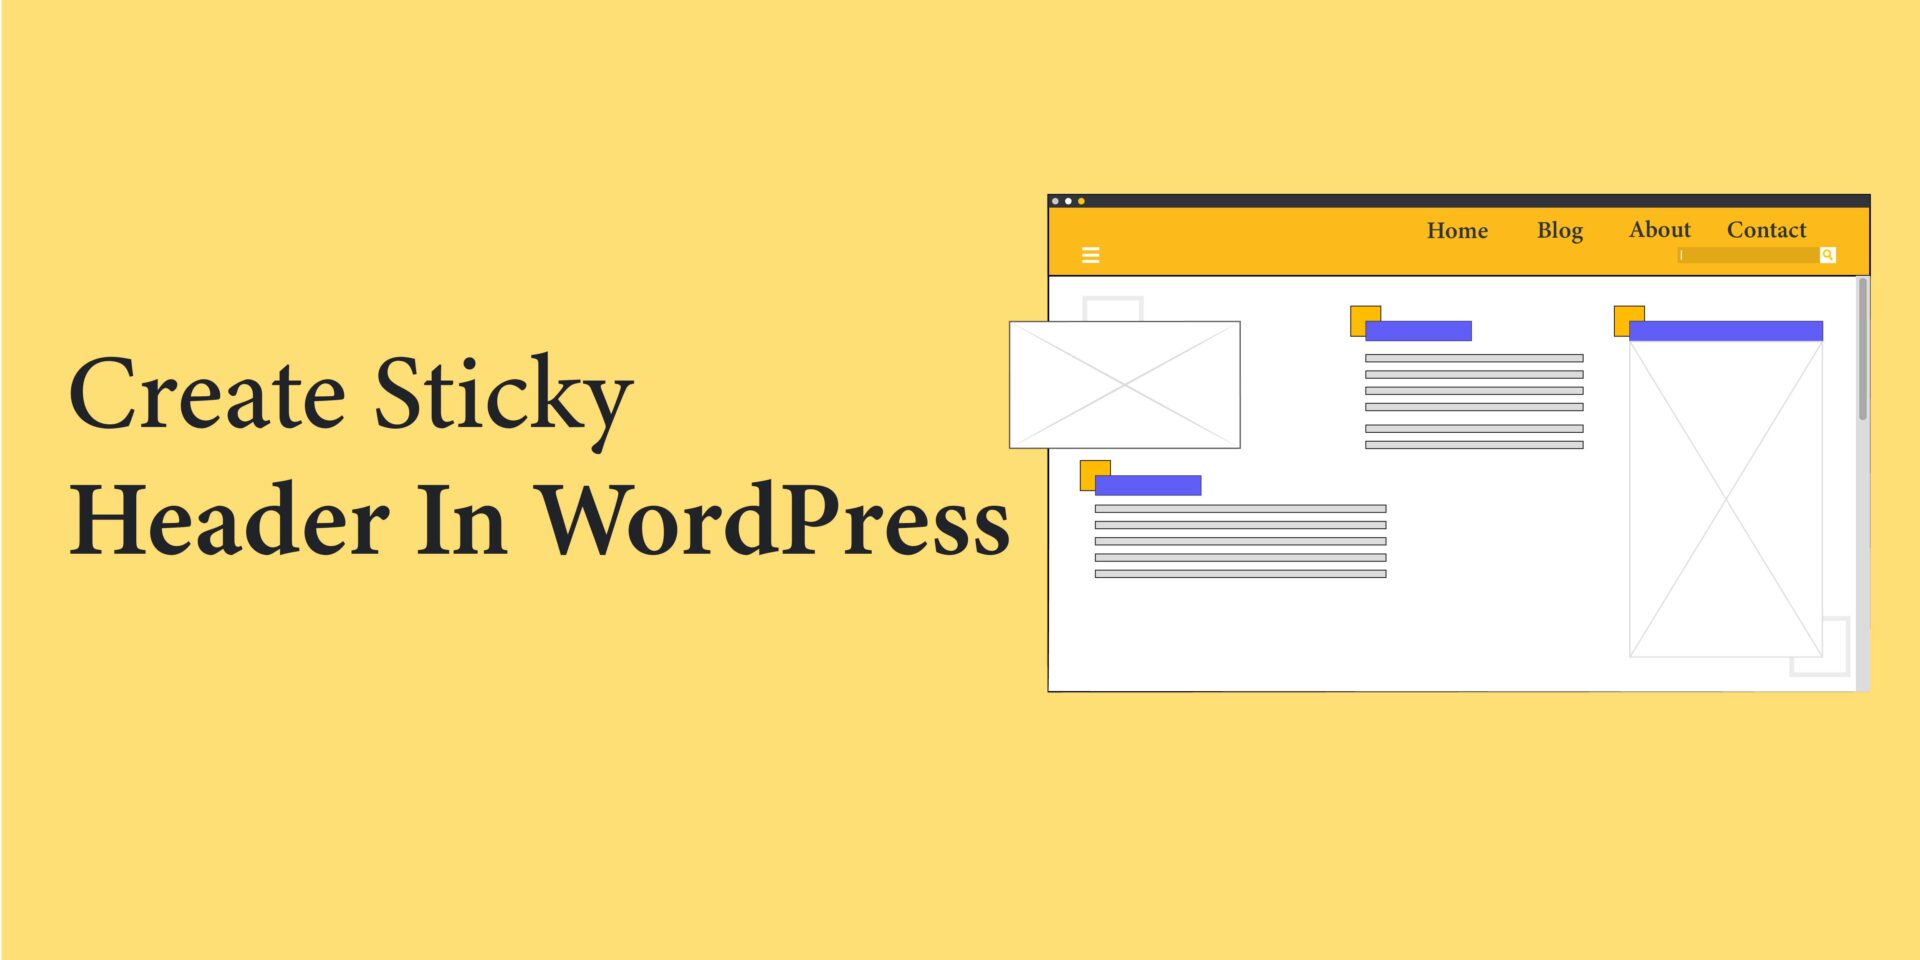 How to Create a Sticky Header in WordPress